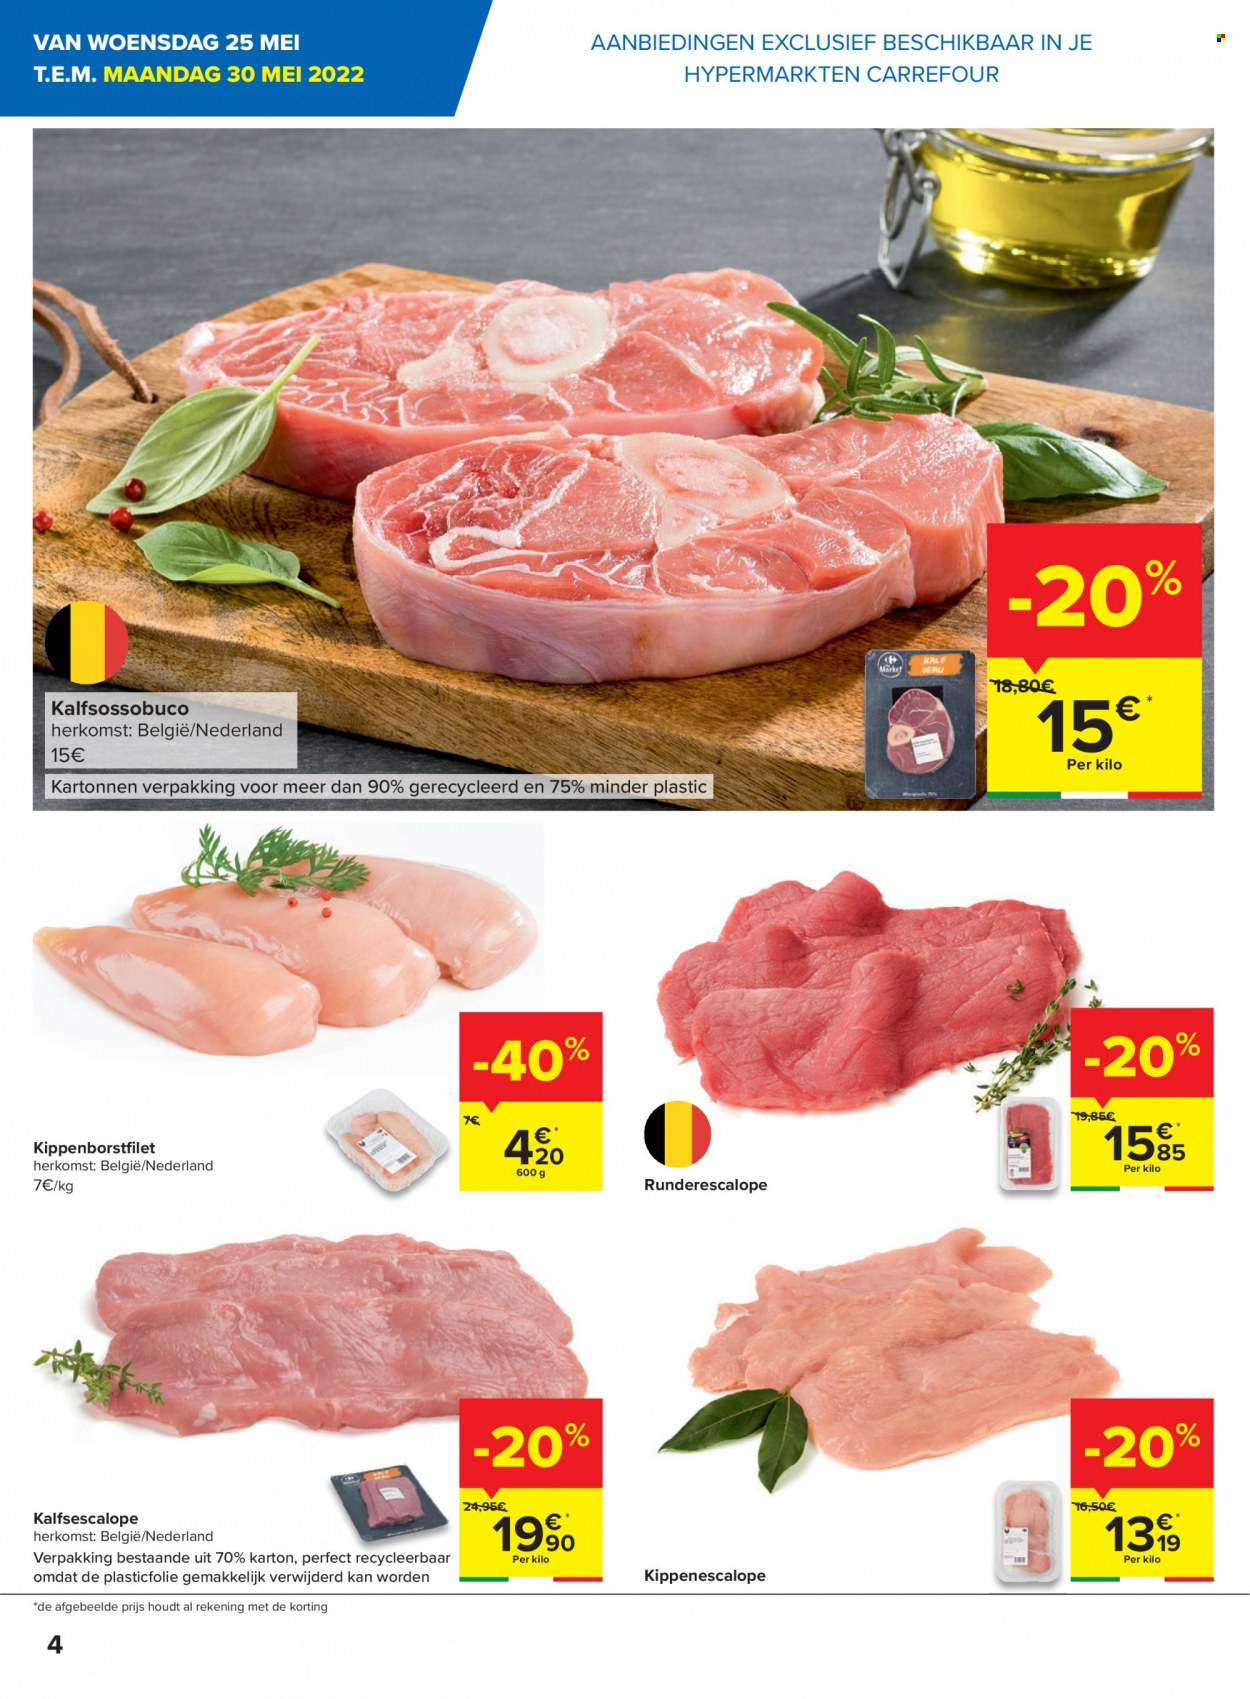 Catalogue Carrefour hypermarkt - 24.5.2022 - 30.5.2022. Page 4.